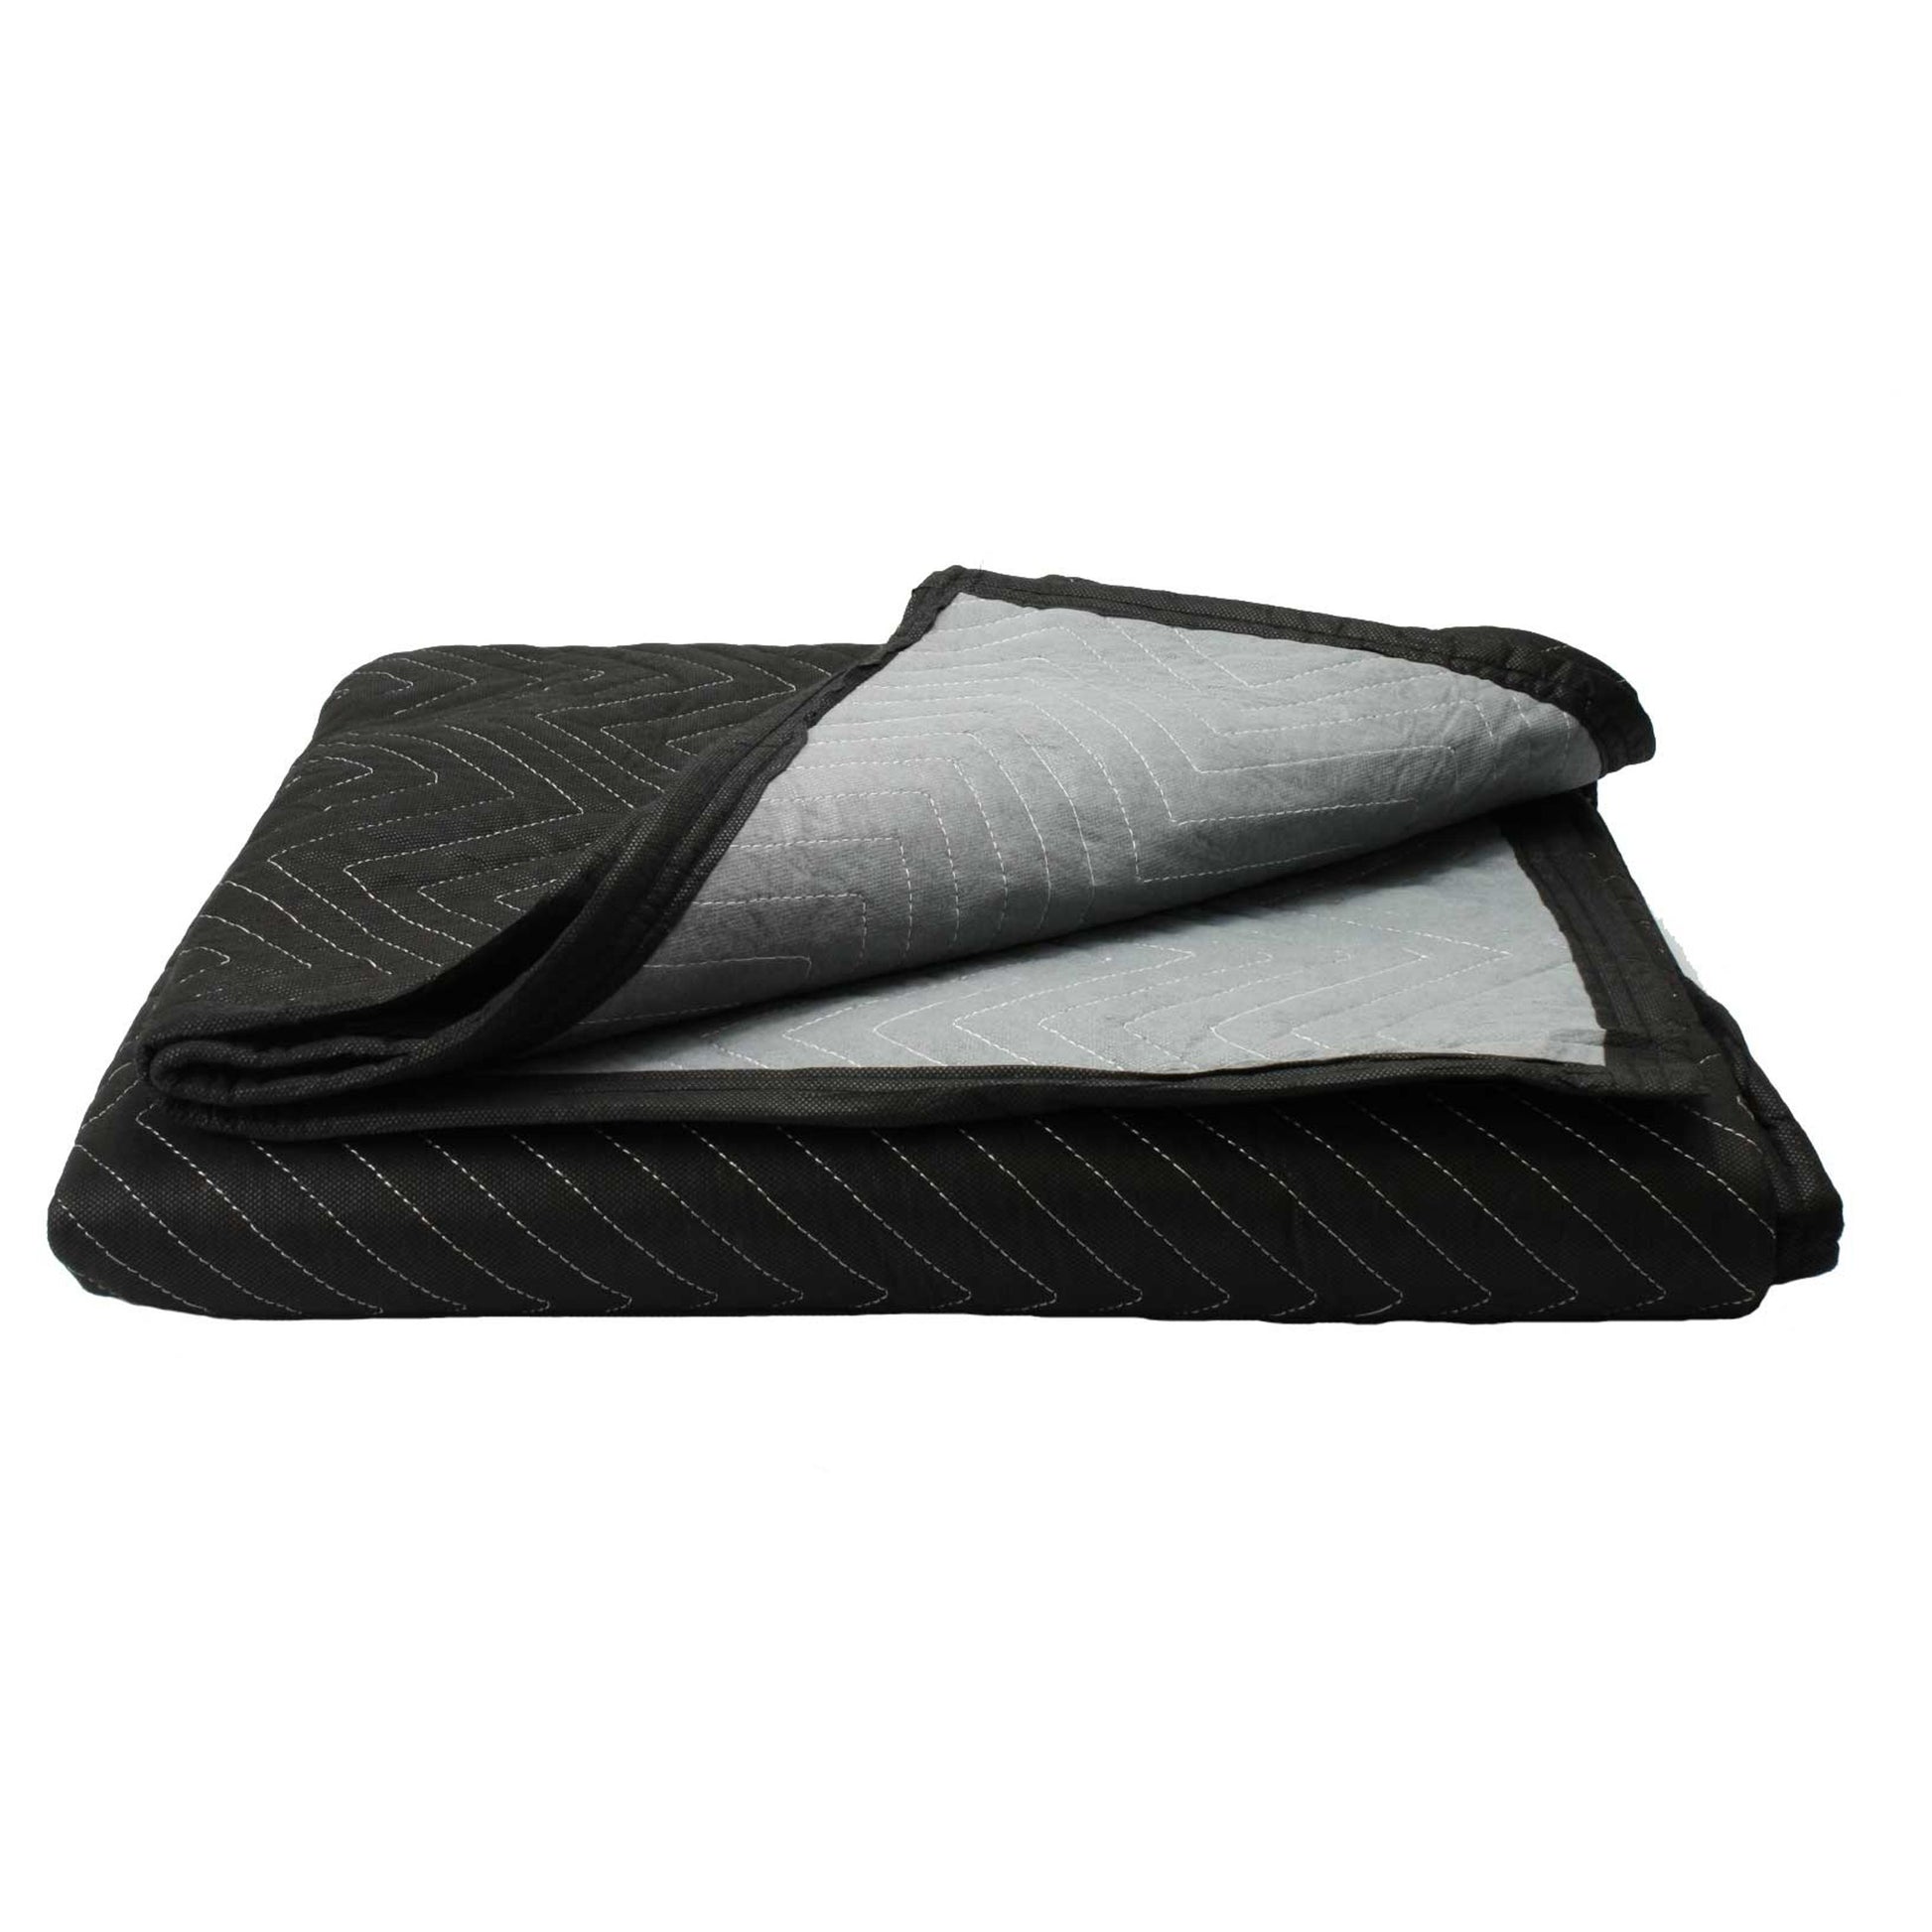 Moving Blankets- Econo Deluxe 12-Pack, 65 lbs./dozen image 2 of 11